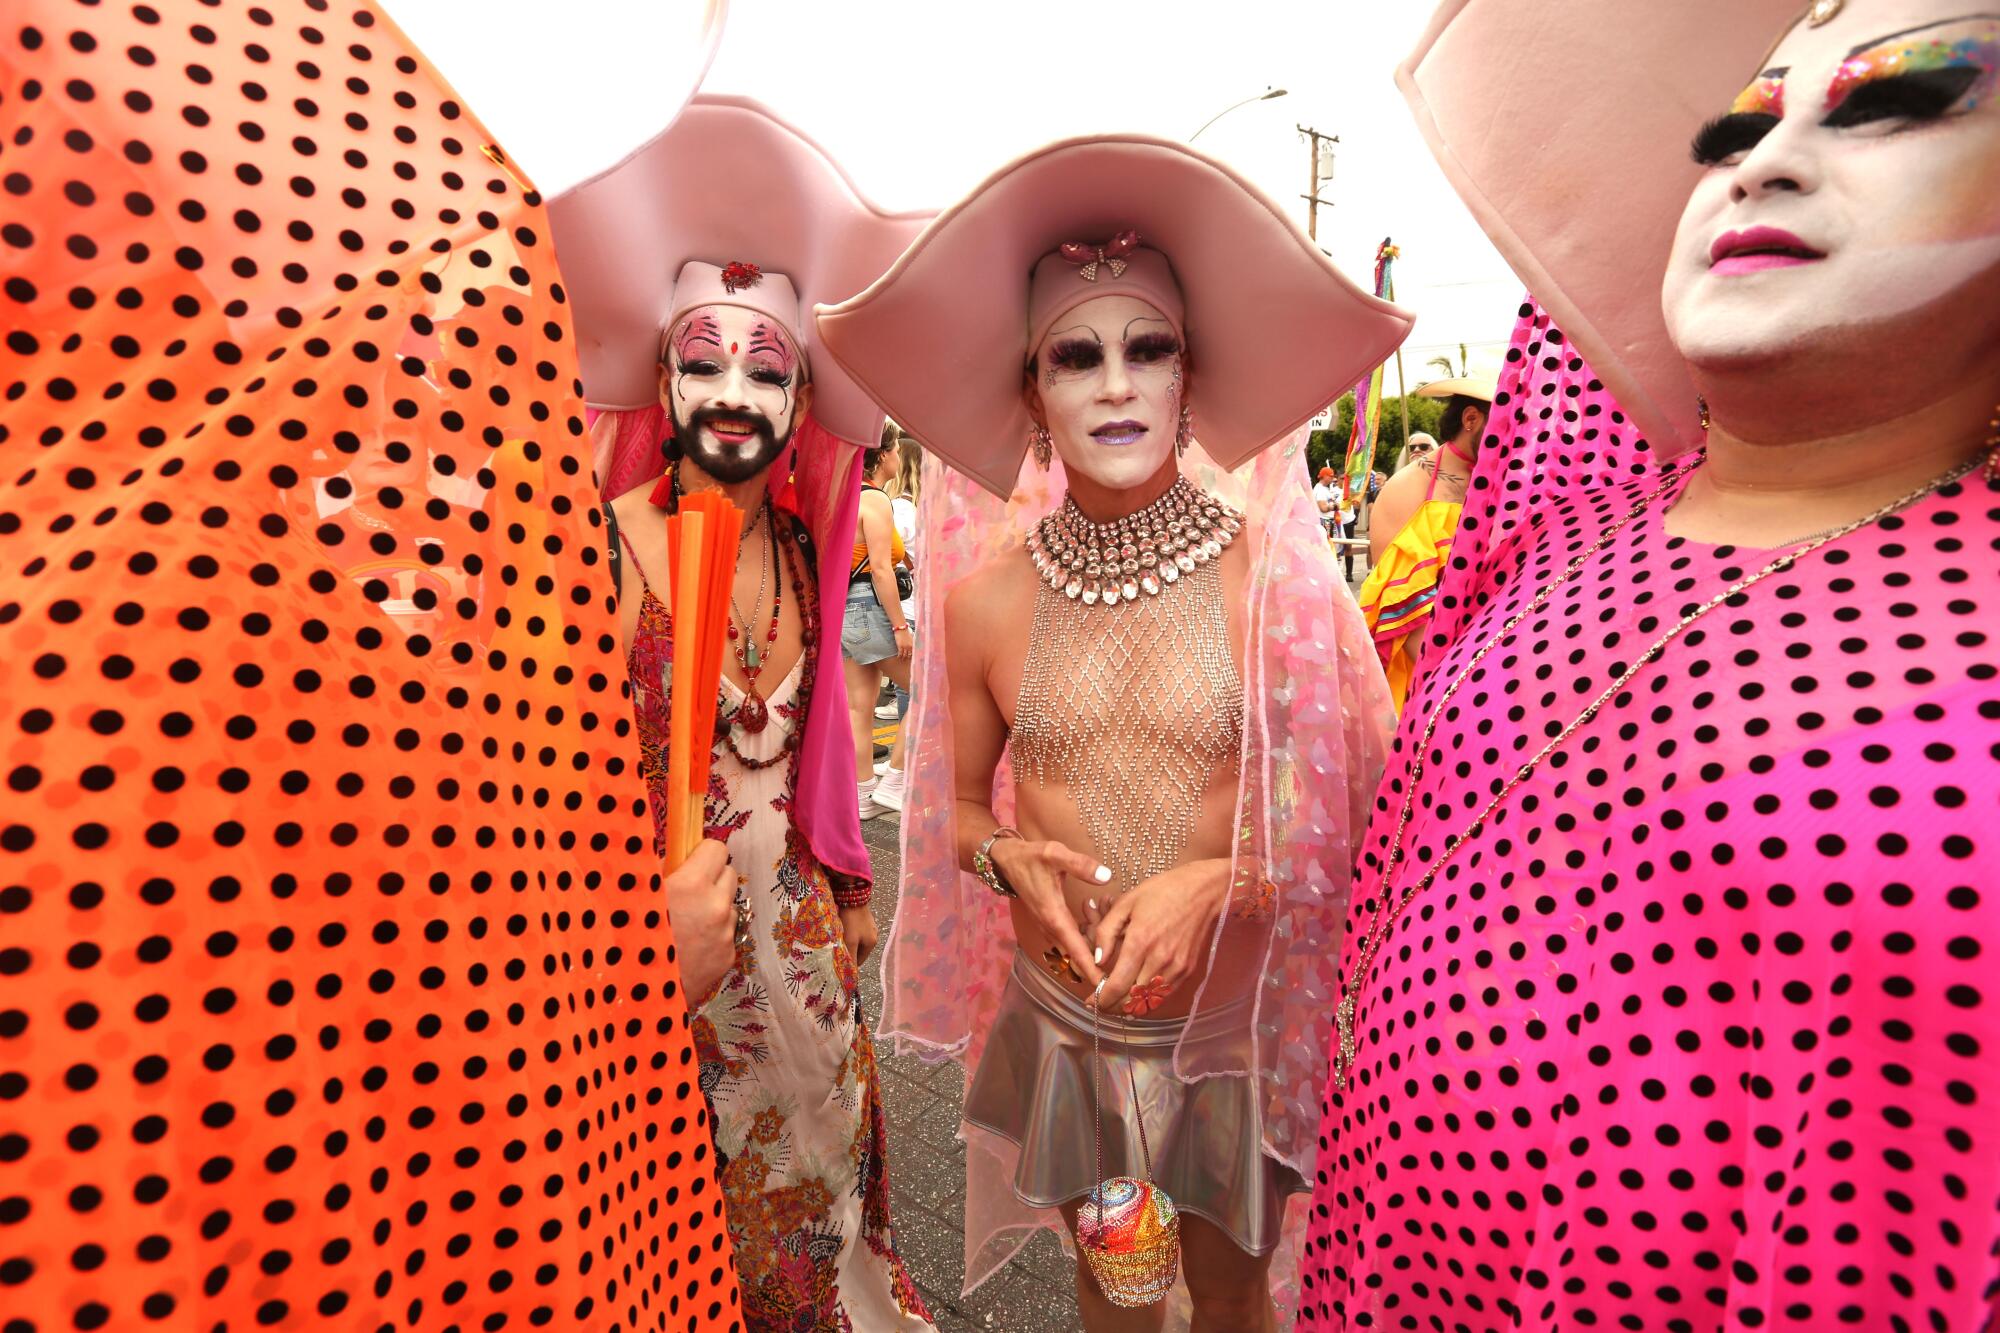 The Sisters of Perpetual Indulgence participate in the WeHo Pride Parade.